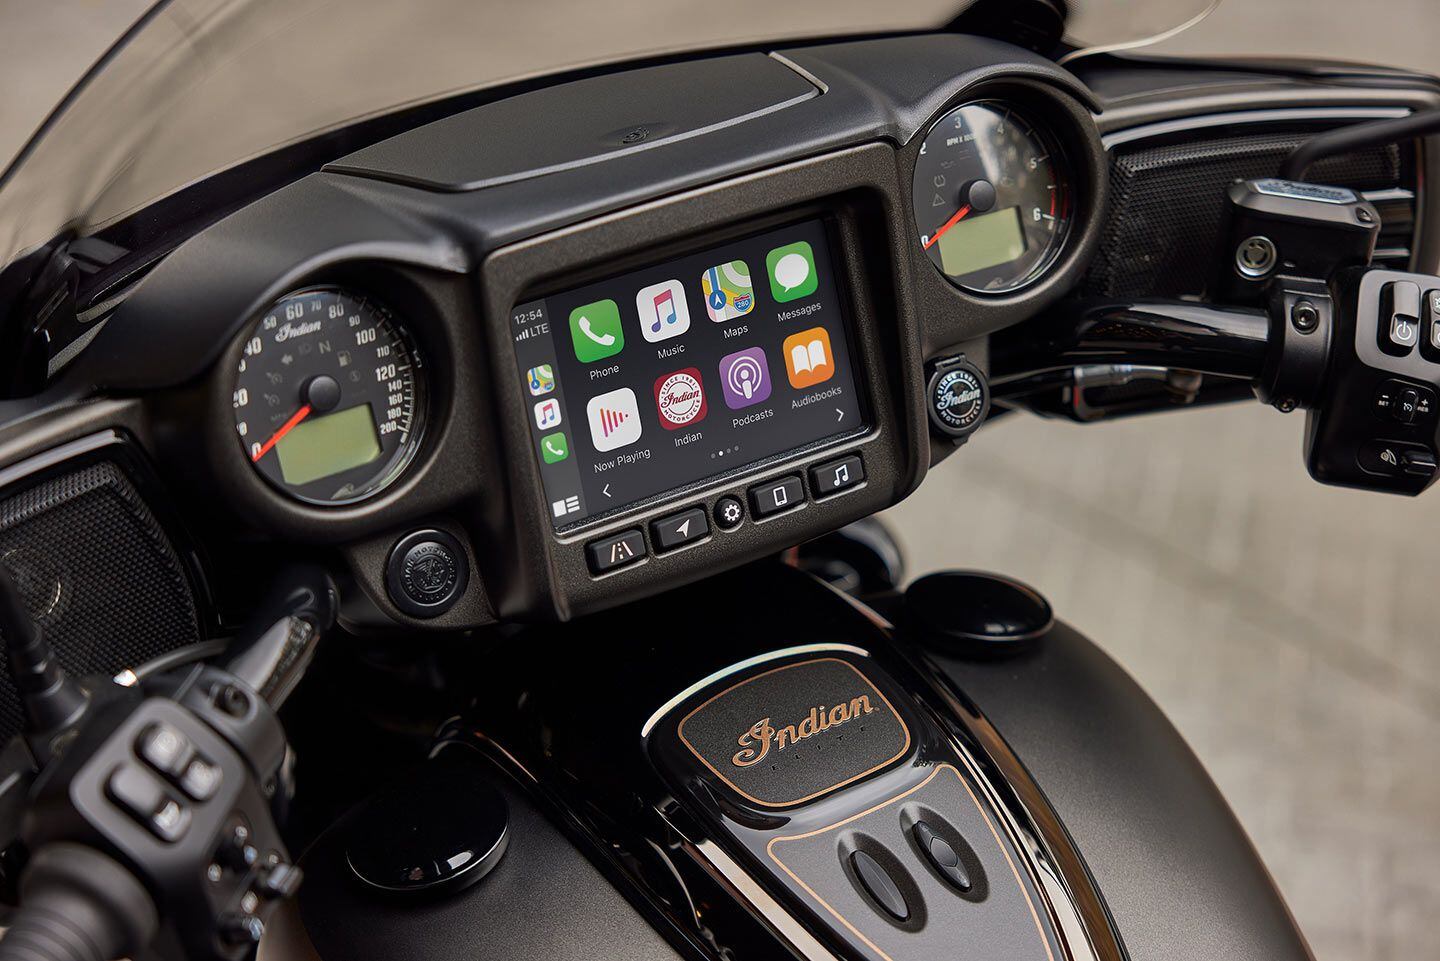 As on last year’s model, the 2023 Chieftain Elite also packs a 7-inch display with the Ride Command system and integrated PowerBand Audio.